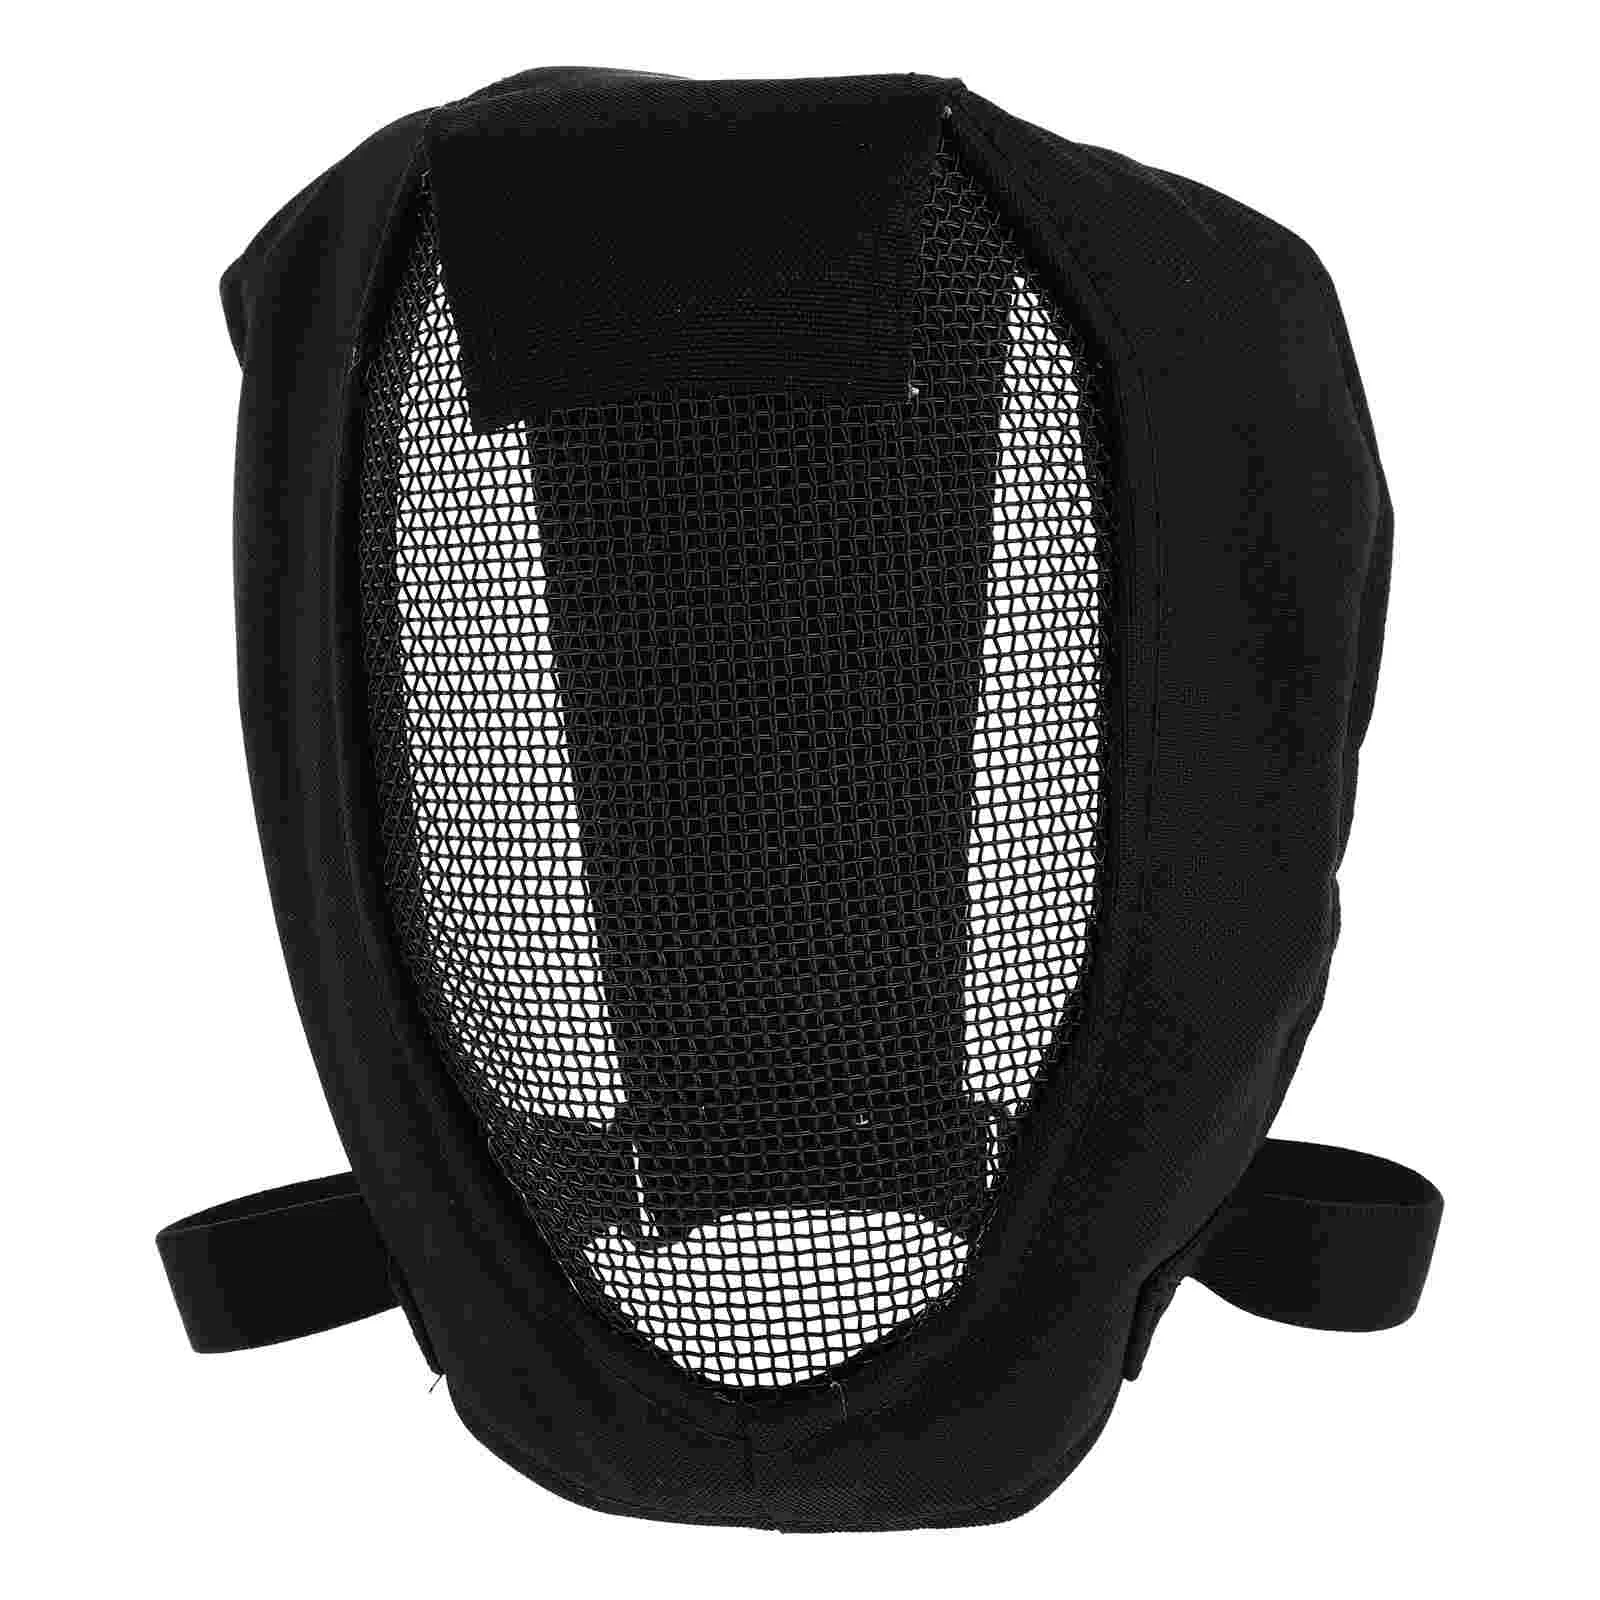 

Black Masks Outdoor Game Full Safety Protection Fencing Mesh Breathable Tactics Field Protective Head Cover